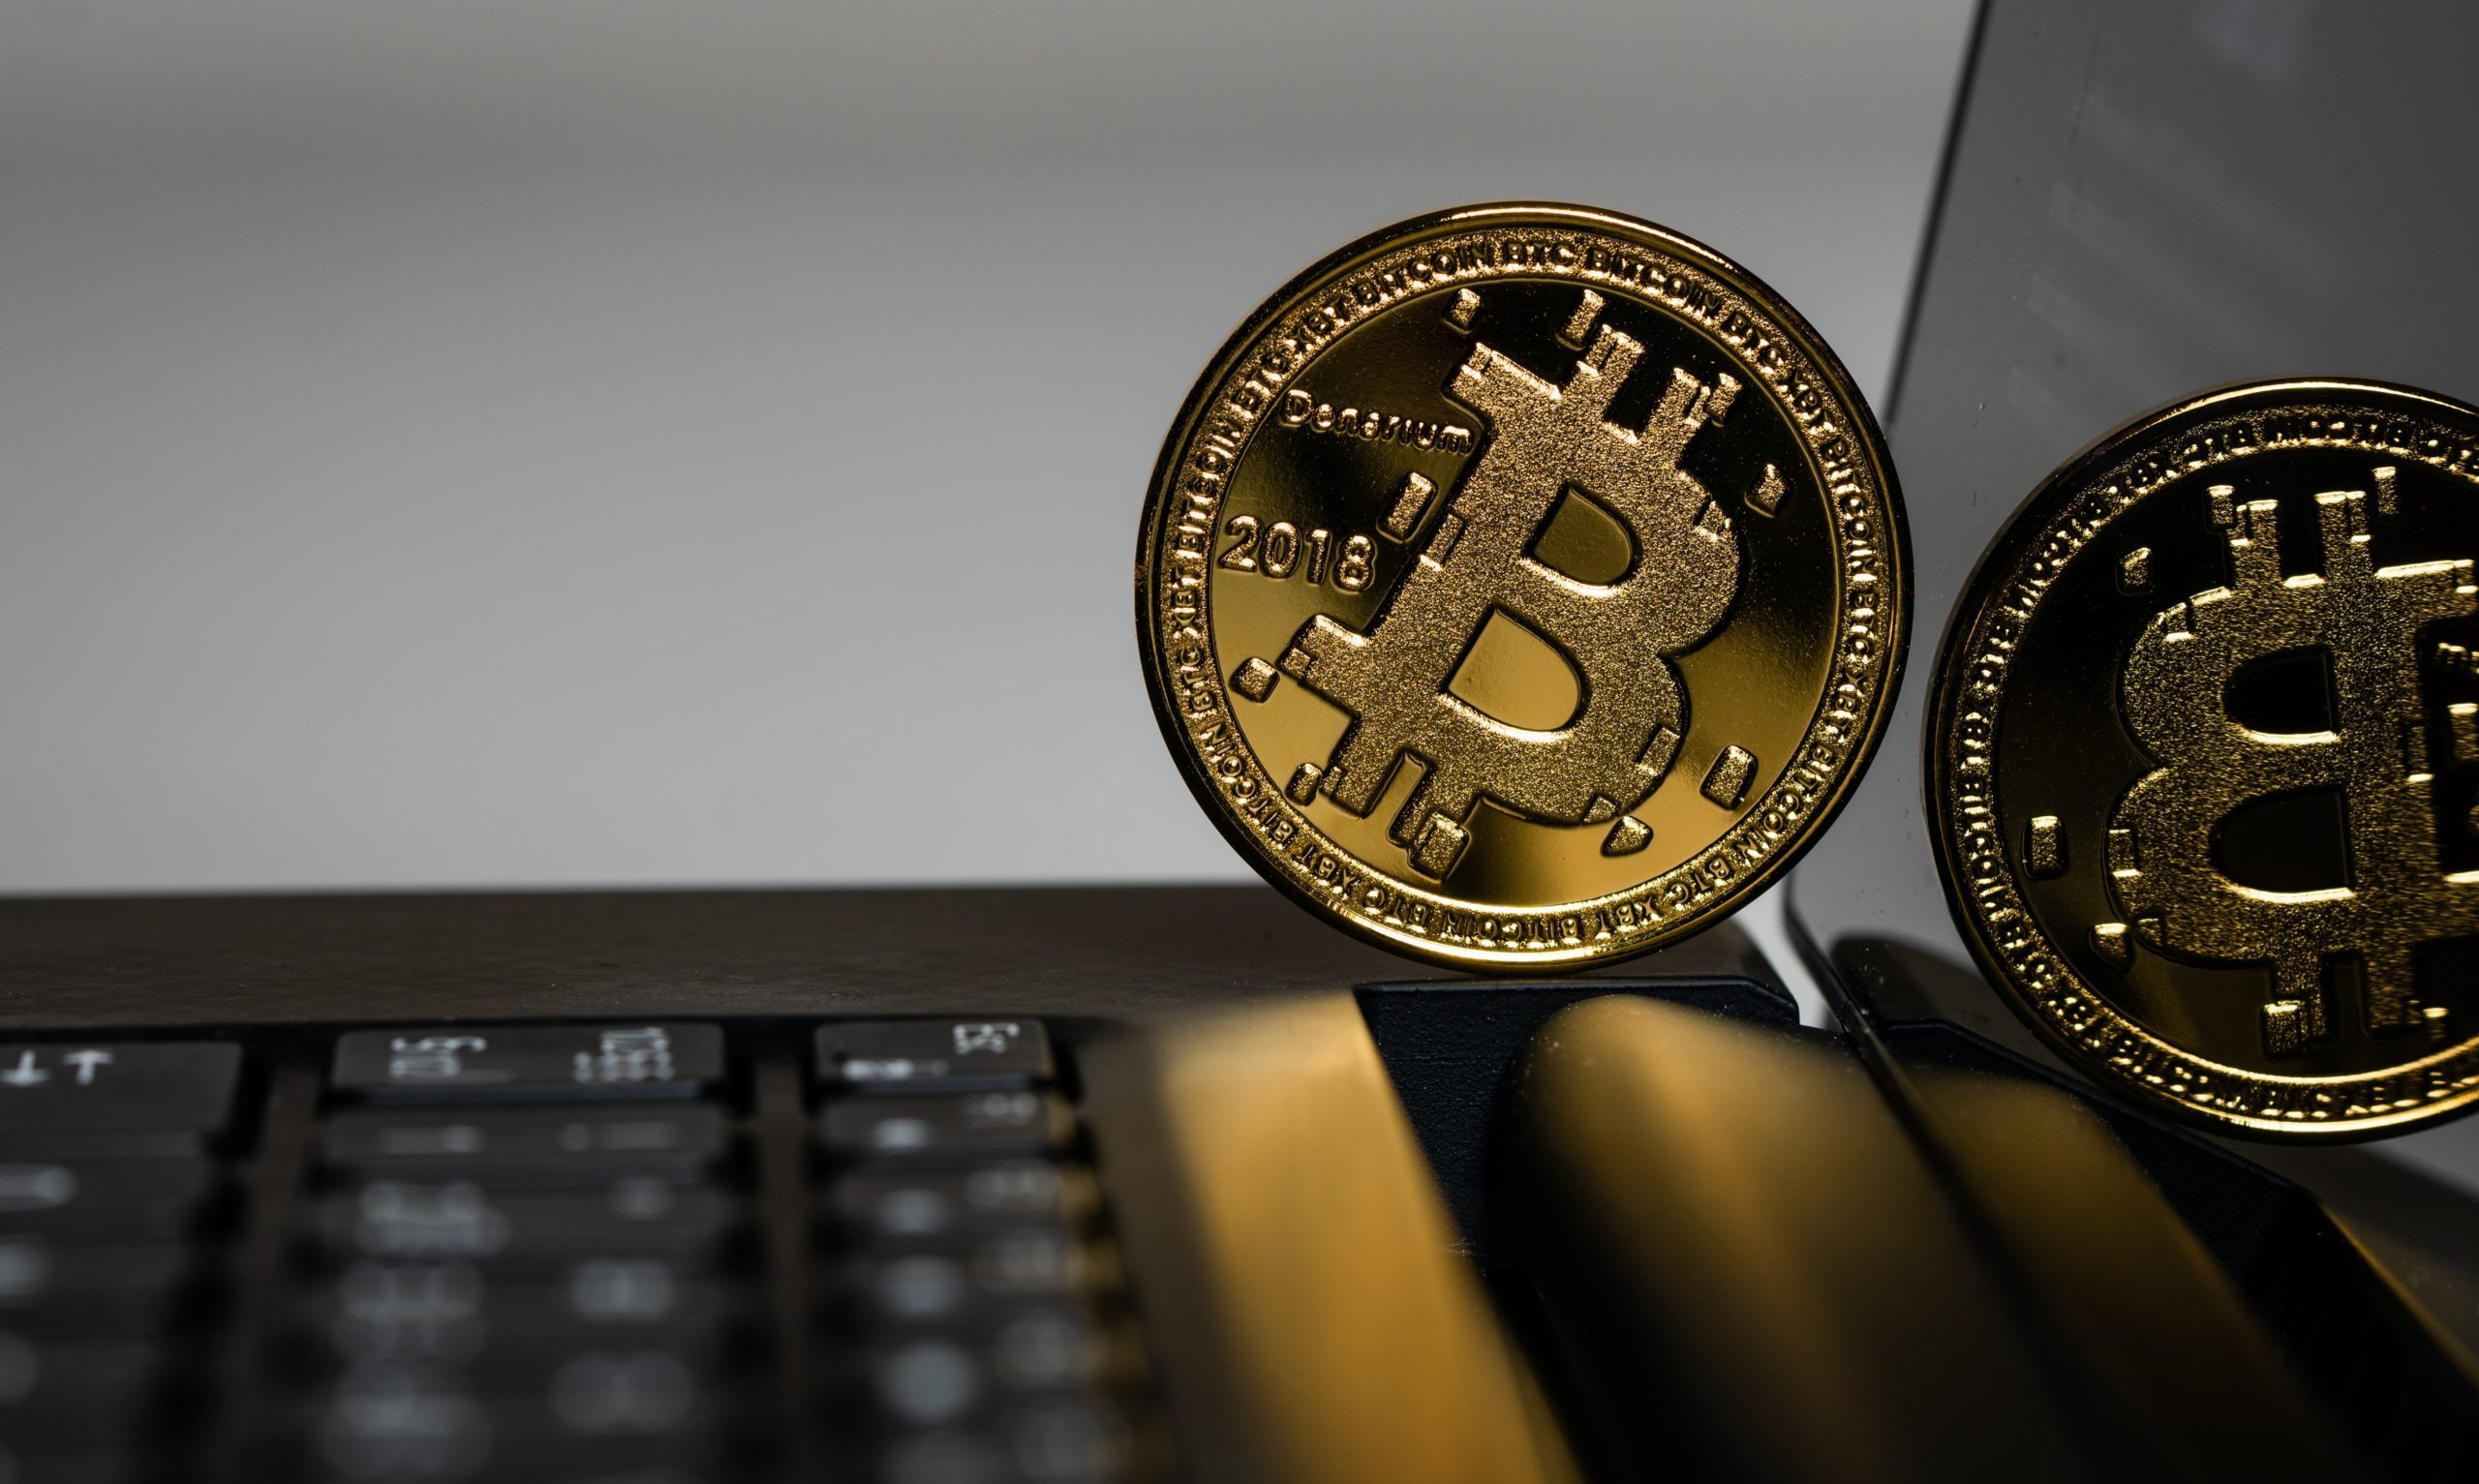 A bitcoin on the surface of a laptop